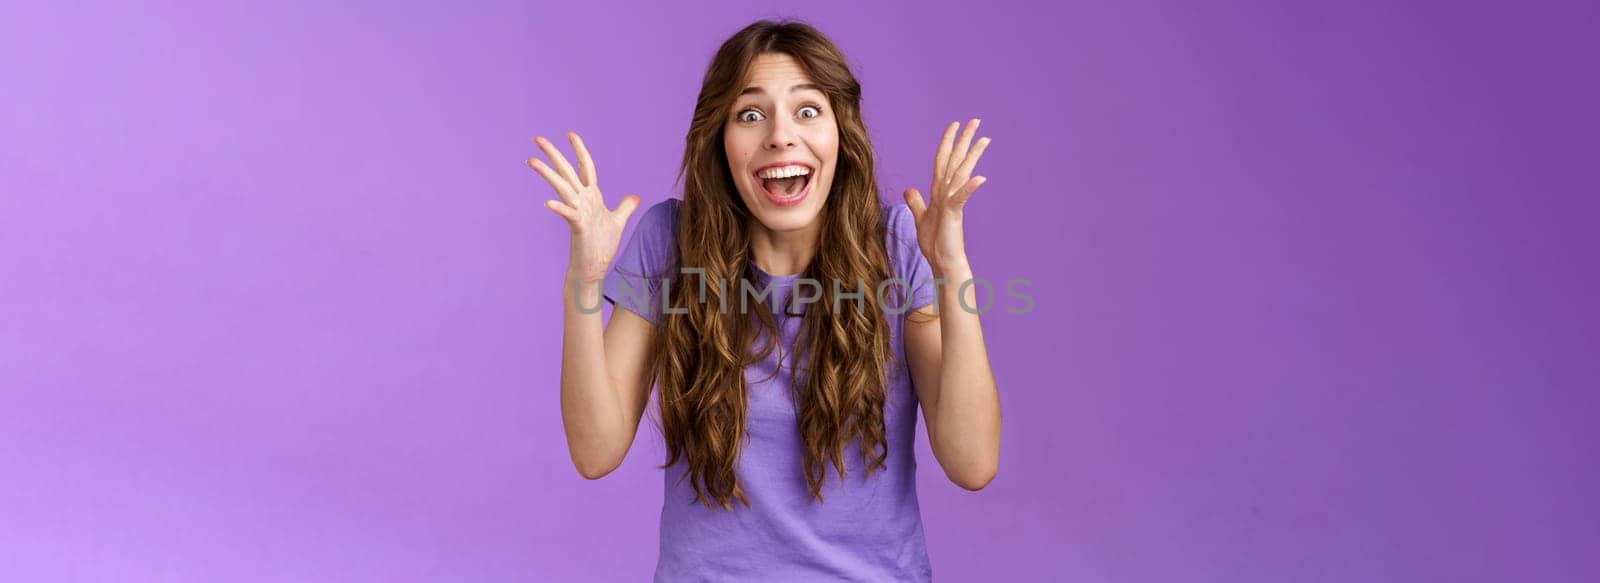 Cheerful surprised happy girl receive unbelievable super prize winning triumphing smiling joyfully shake hands excitement joy celebrating perfect news grinning happily victory purple background.